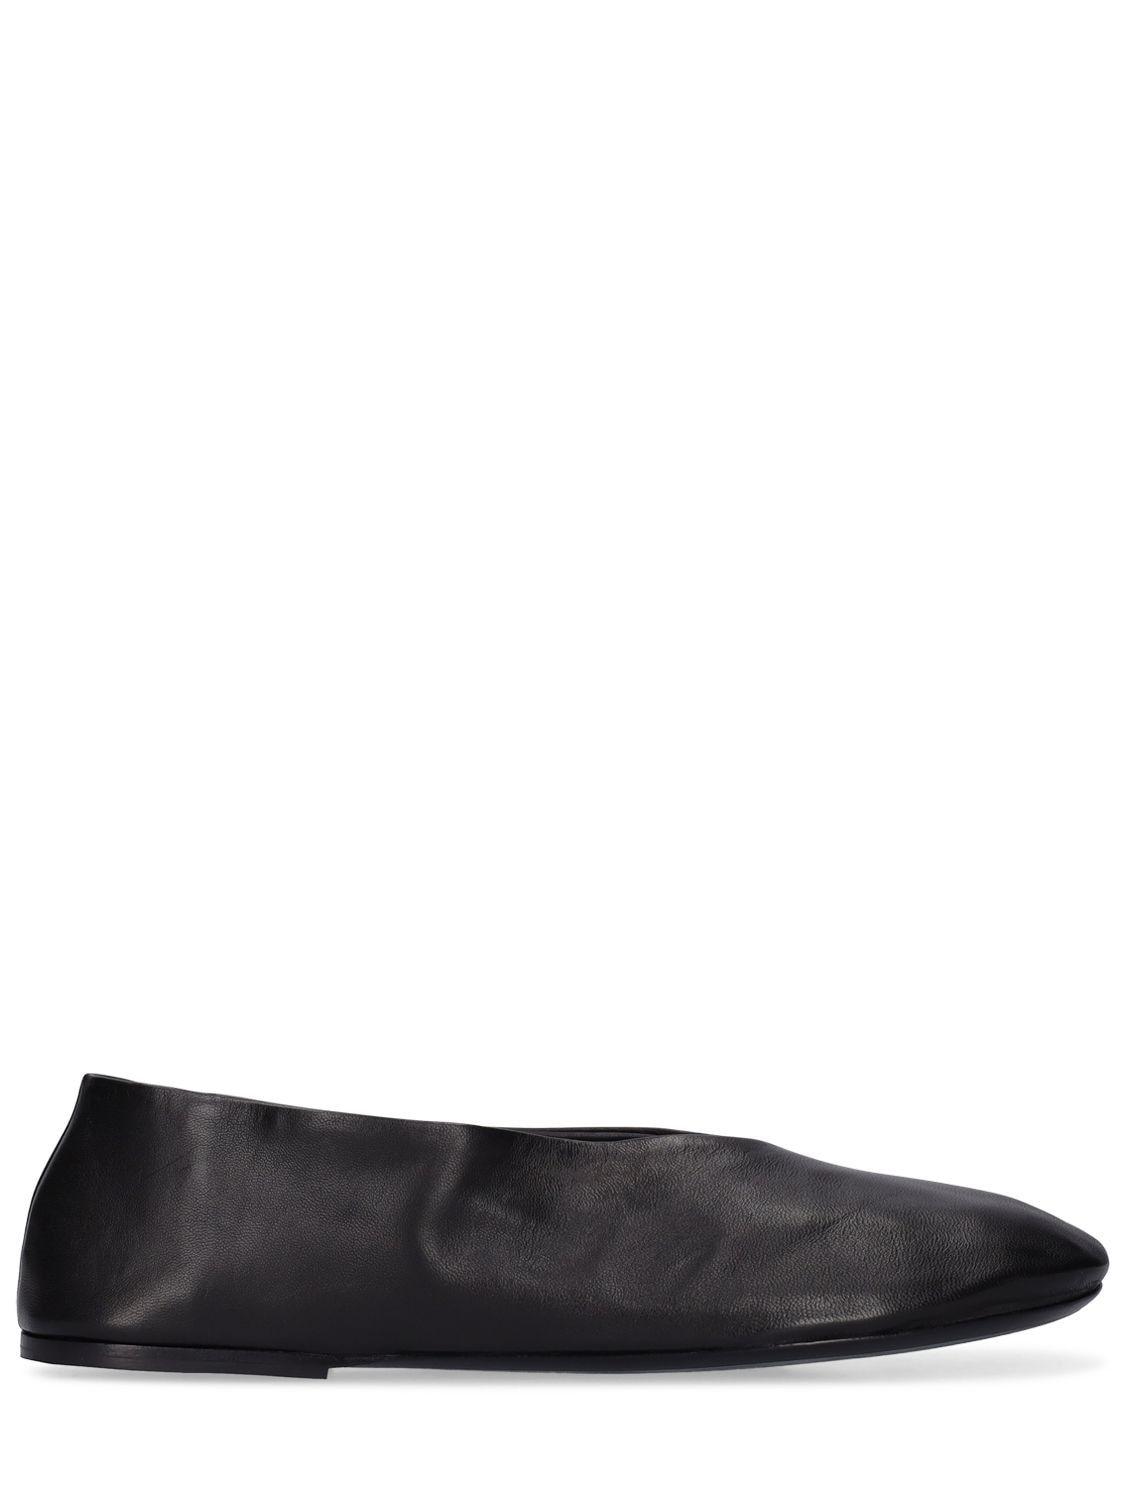 Khaite 10mm Marcy Leather Flats in Black | Lyst